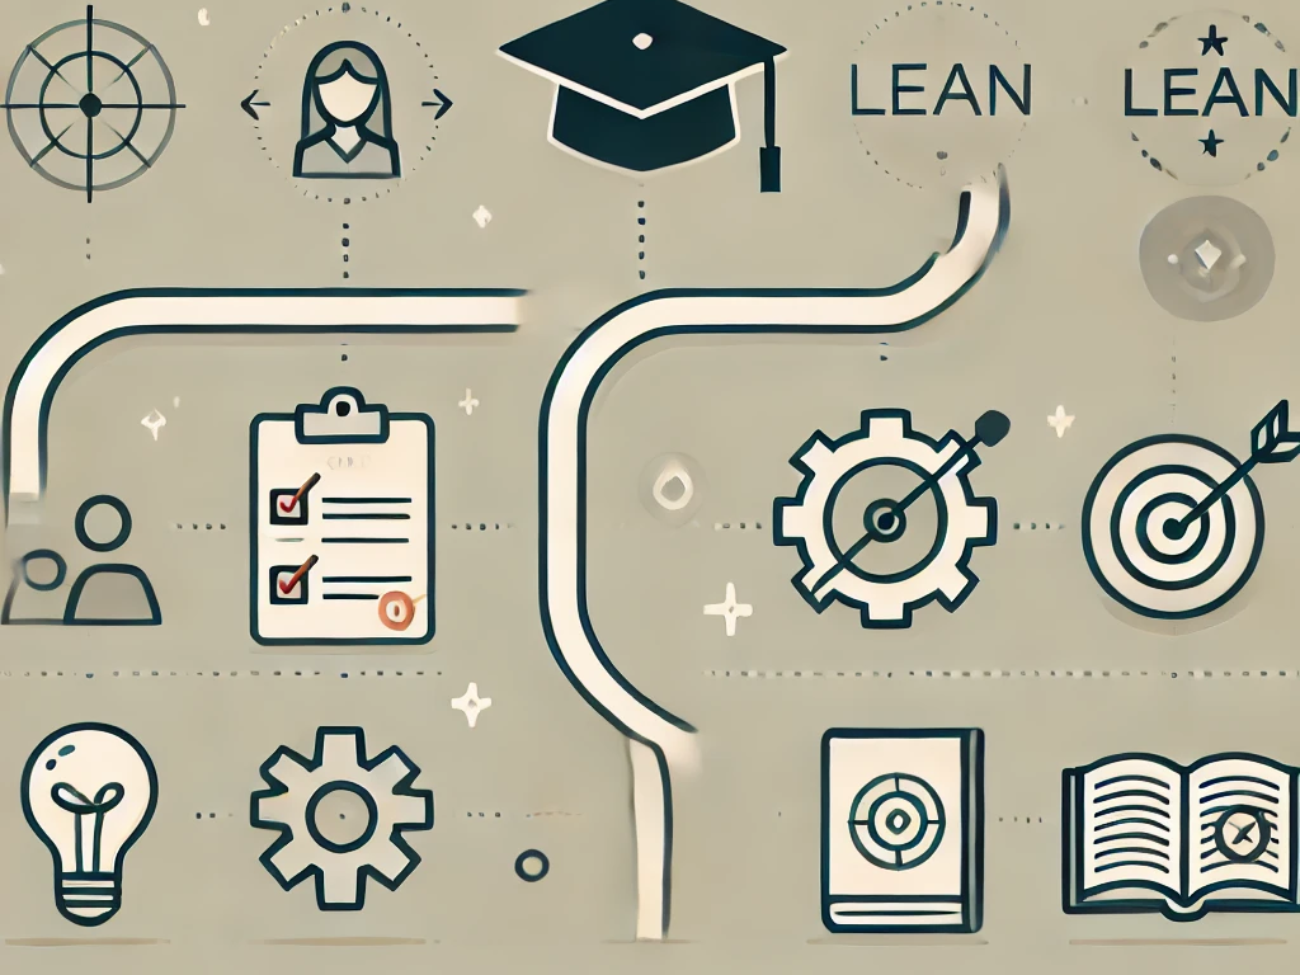 DALL·E 2024-06-26 17.08.04 - A minimalistic image representing the concept of lean education. The image should feature simple, clean lines and muted colors. On one side, depict a